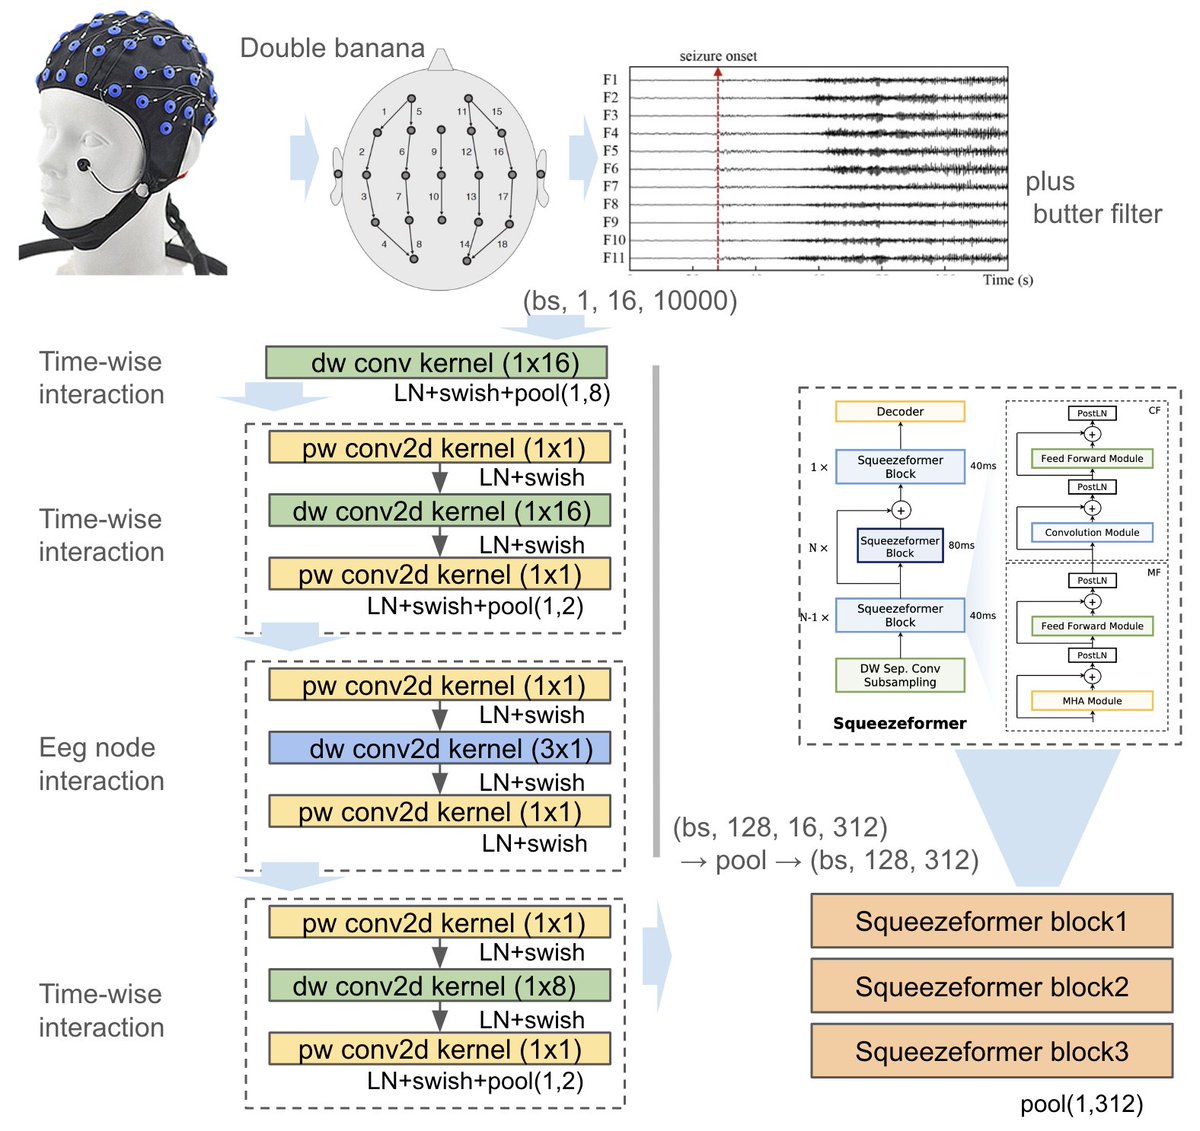 HMS competition on @kaggle was wide open to many ways to detect brain seizures in patient scans. This architecture from @kagglingdieter & myself on eeg signals earned us 🥉 third place prize. Inspiration came from the published iEEG work of Yuri Sun et al. 1/